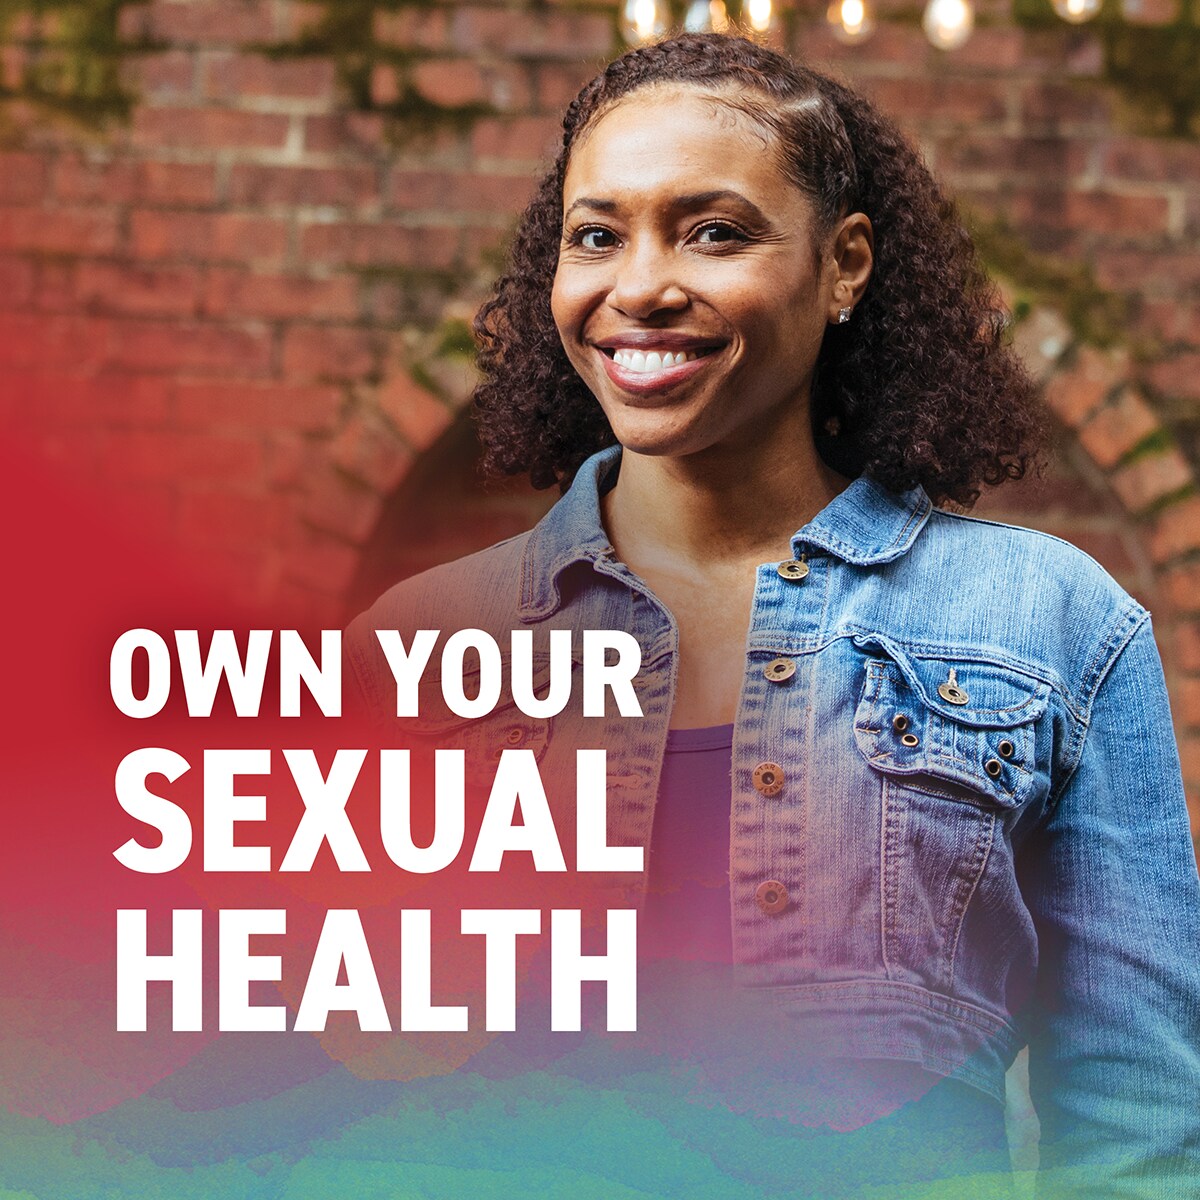 Own your sexual health